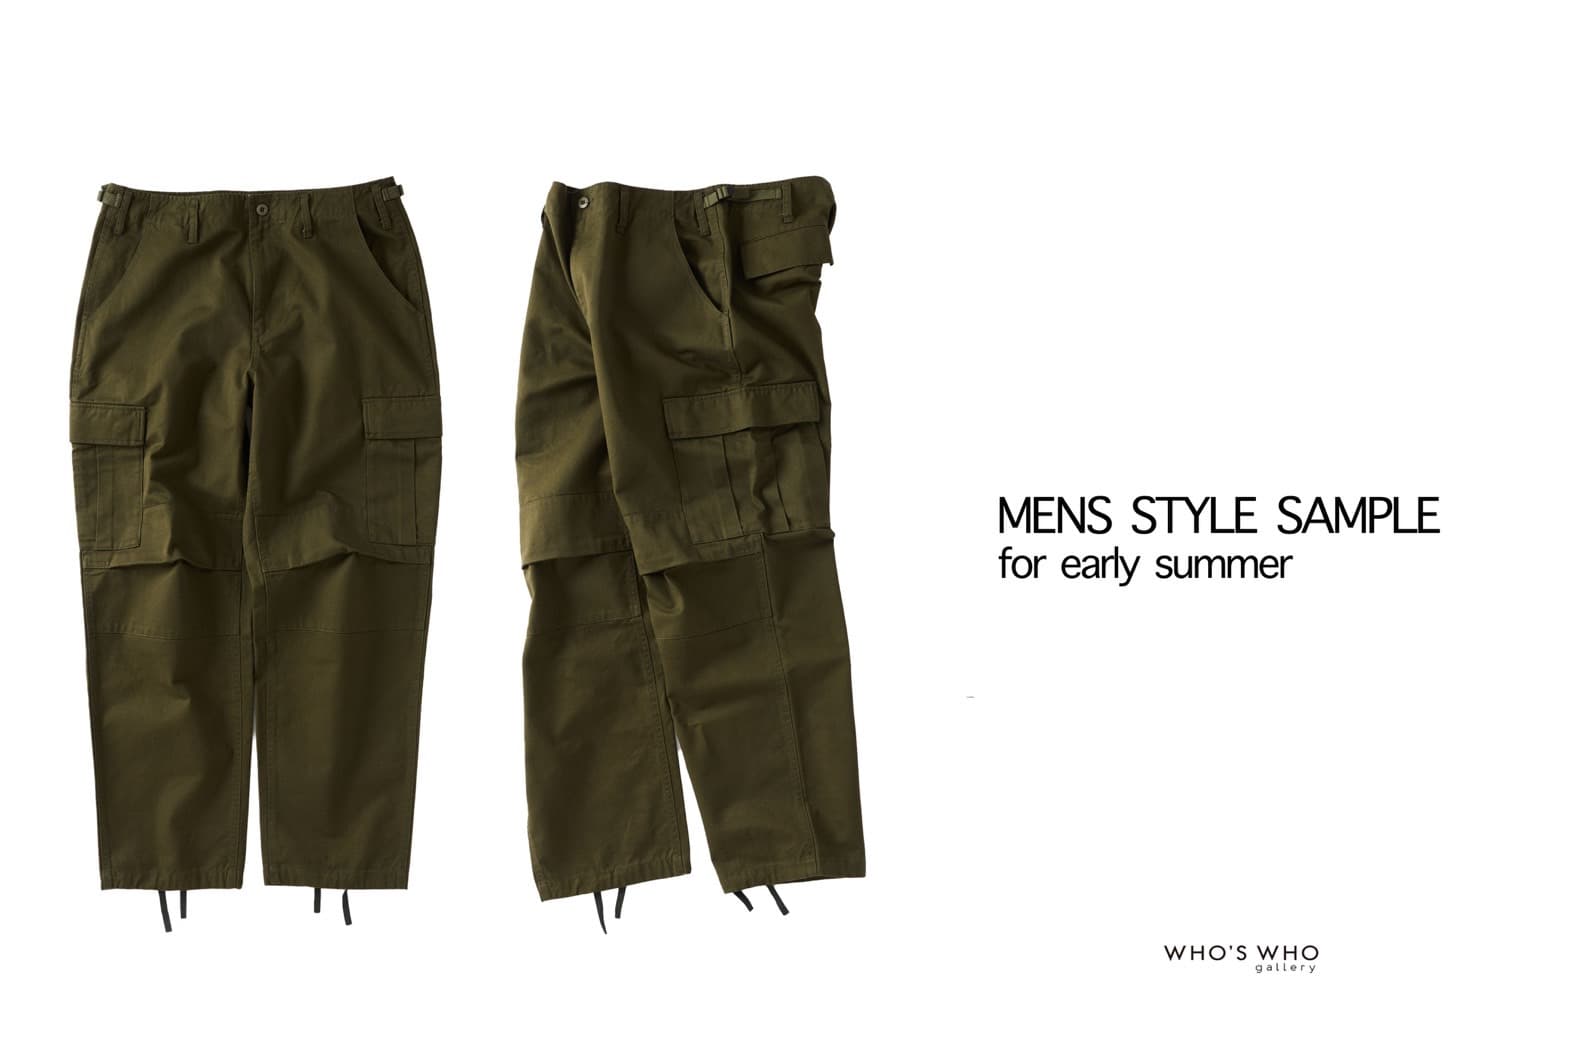 WHO’S WHO gallery 〈MENS STYLE SAMPLE〉for early summer